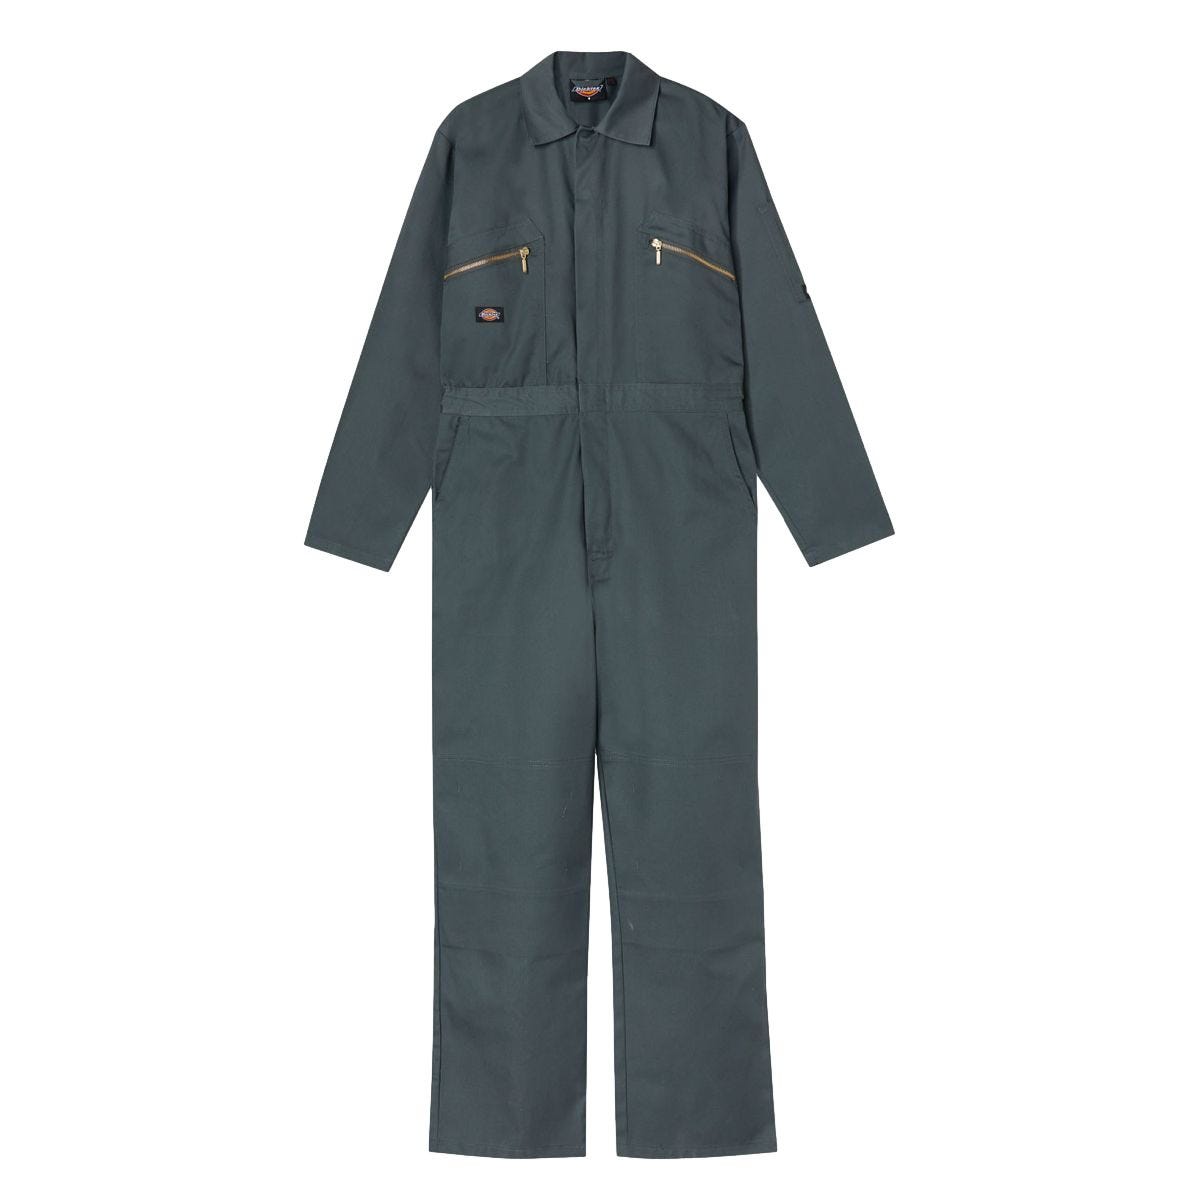 Combinaison Redhawk Coverhall Vert - Dickies - Taille 2XL 0